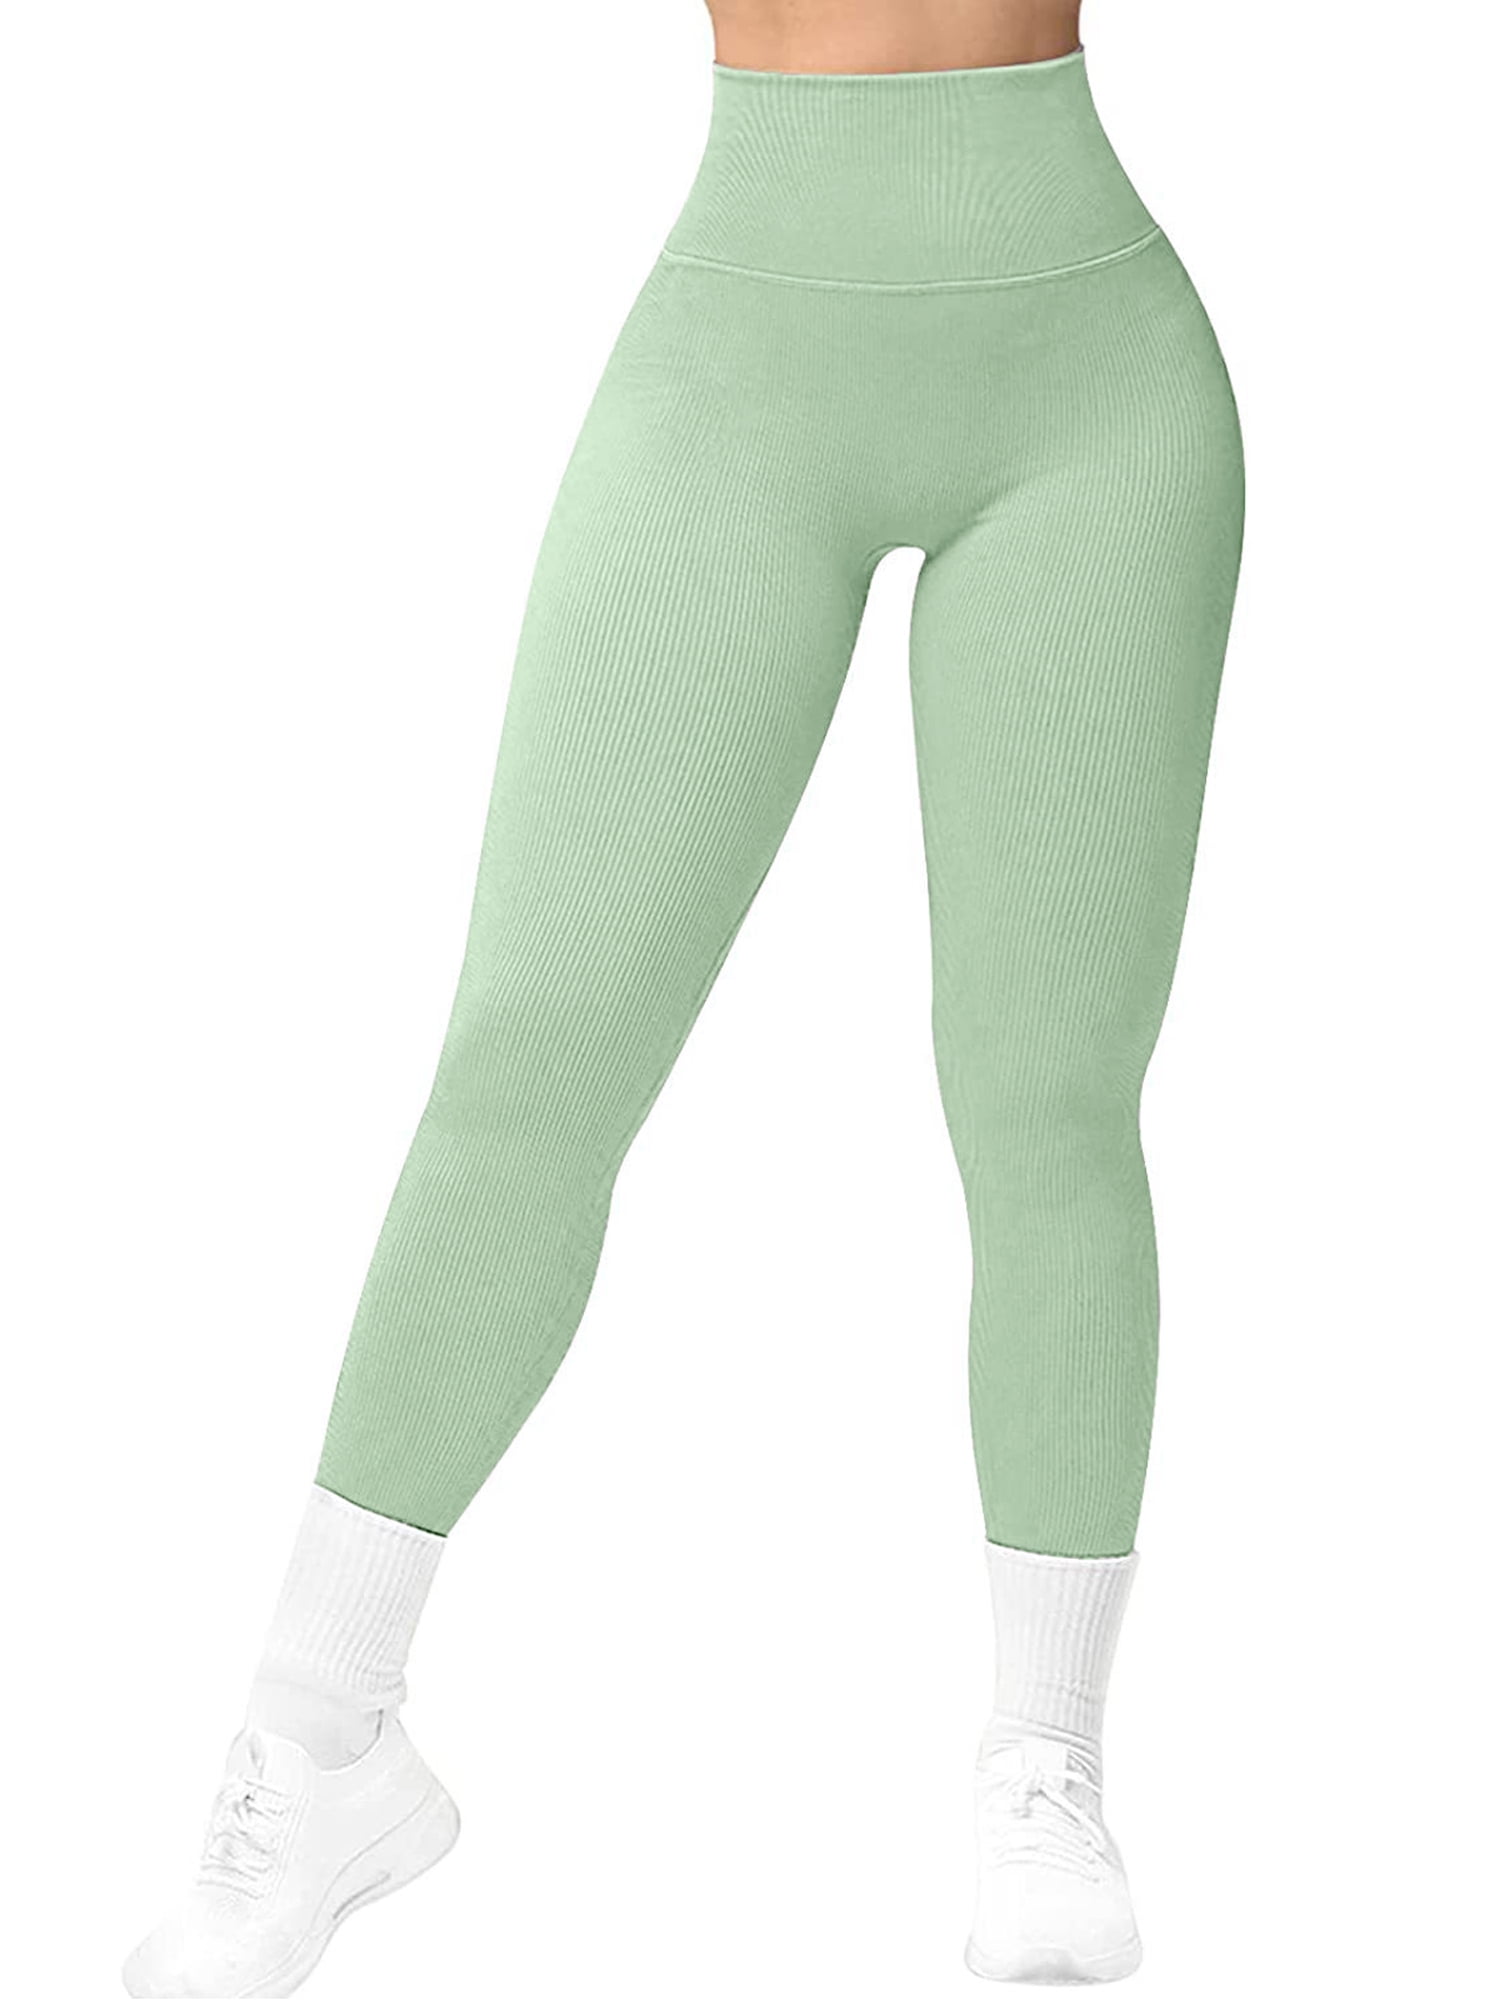 Soft Leggings for Women High Waisted Tummy Control No See Through Workout  Yoga Pants 